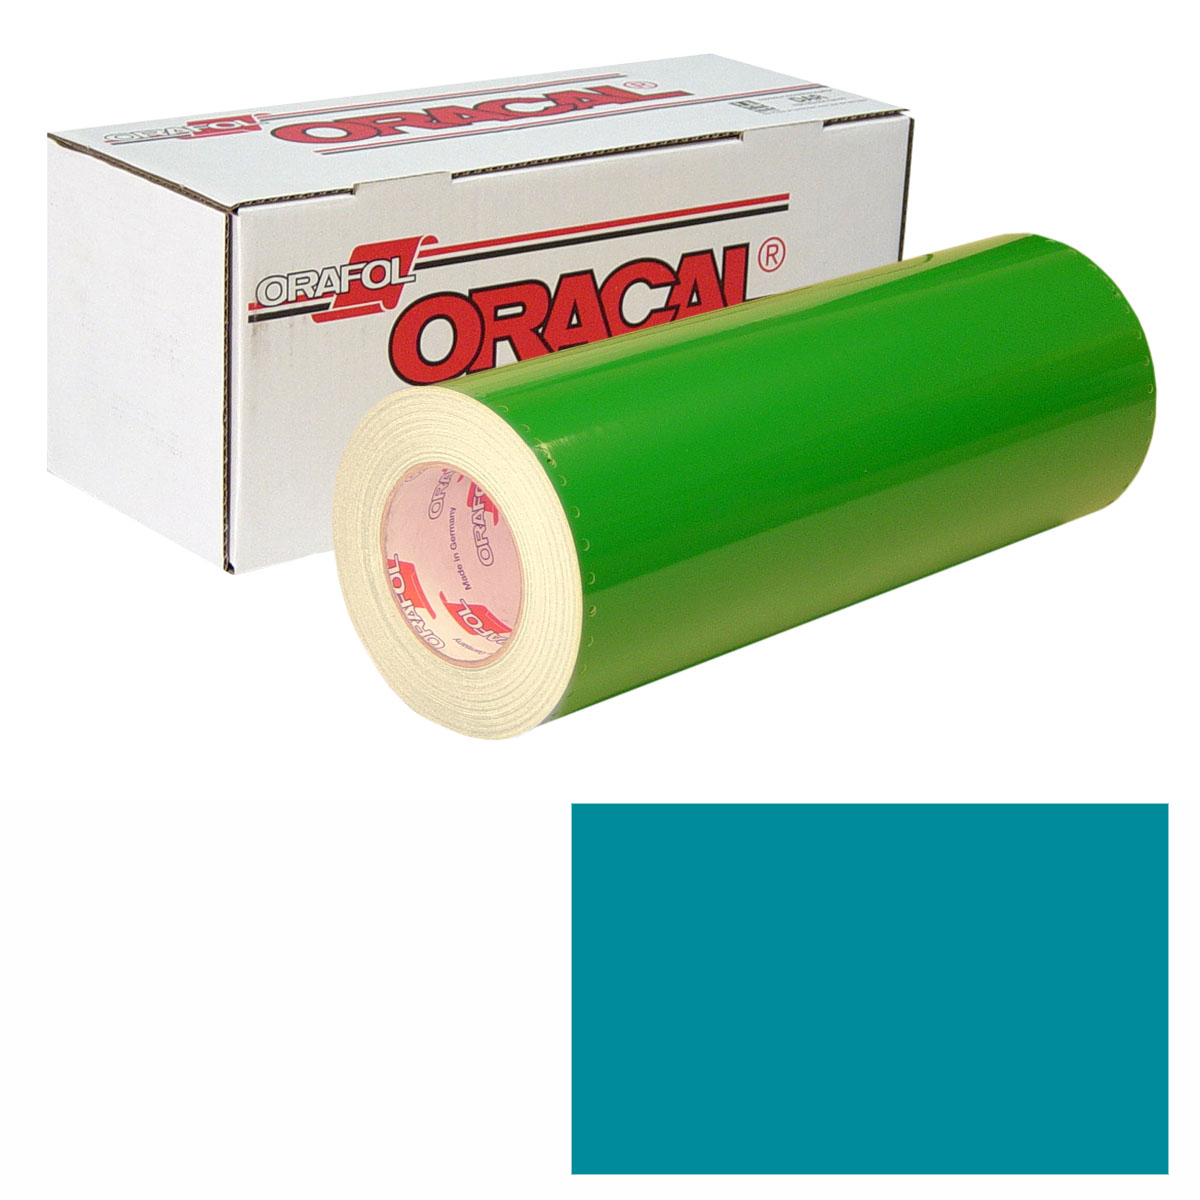 ORACAL 651 Unp 24in X 50yd 066 Turquoise Blue